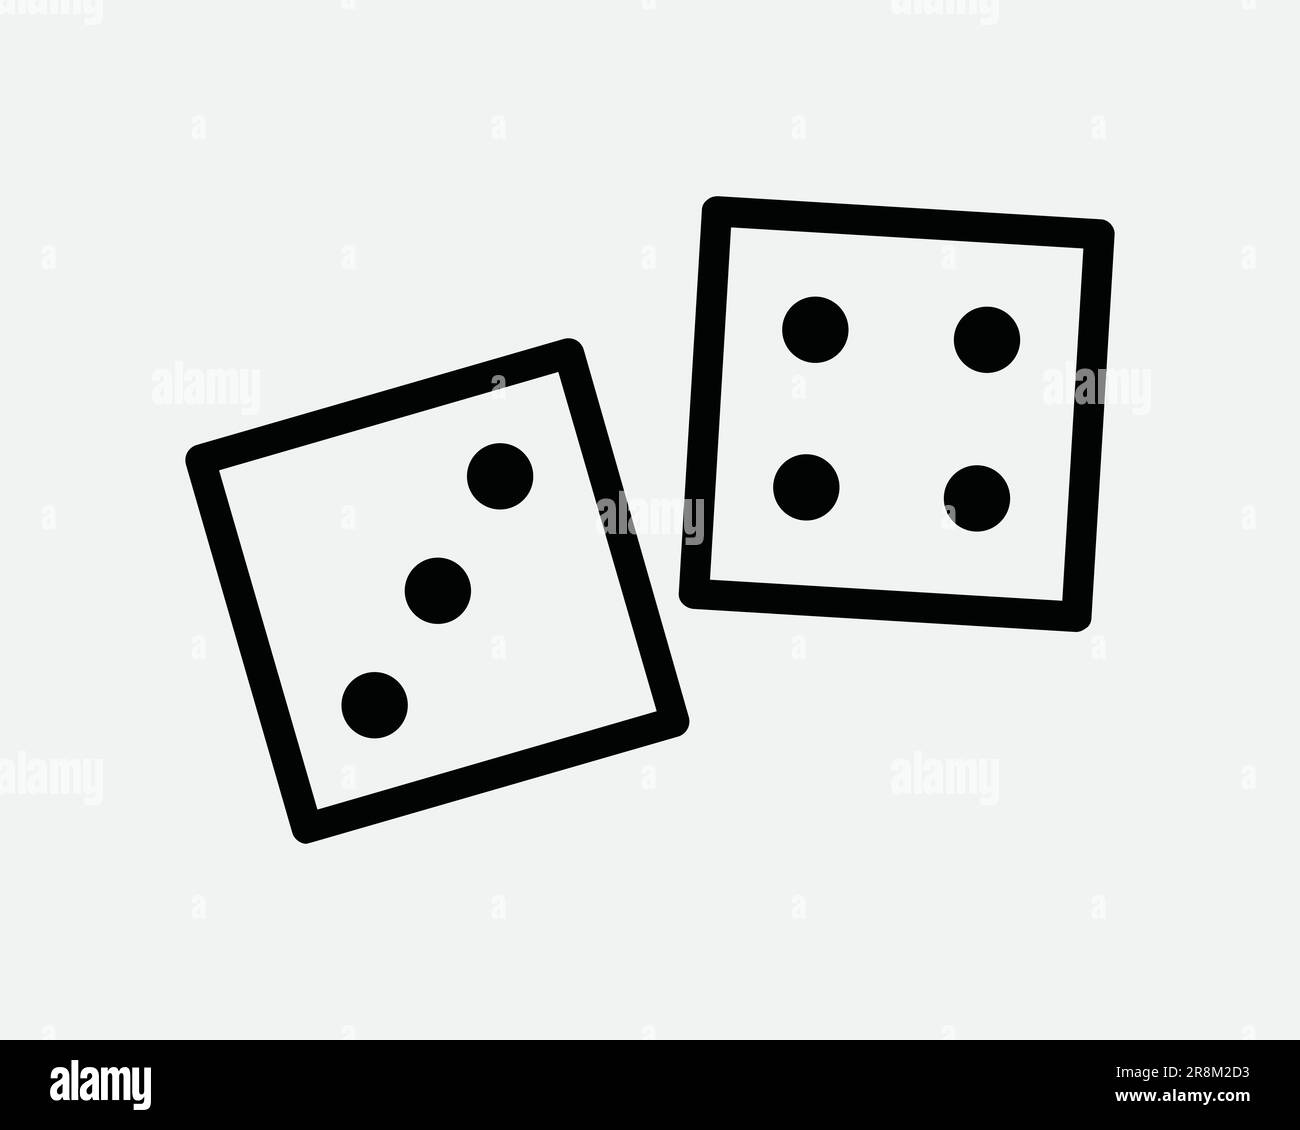 Casino Dice Icon. Gambling Gamble Luck Game Play Fortune Cube Success Betting Black White Sign Symbol Illustration Artwork Graphic Clipart EPS Vector Stock Vector